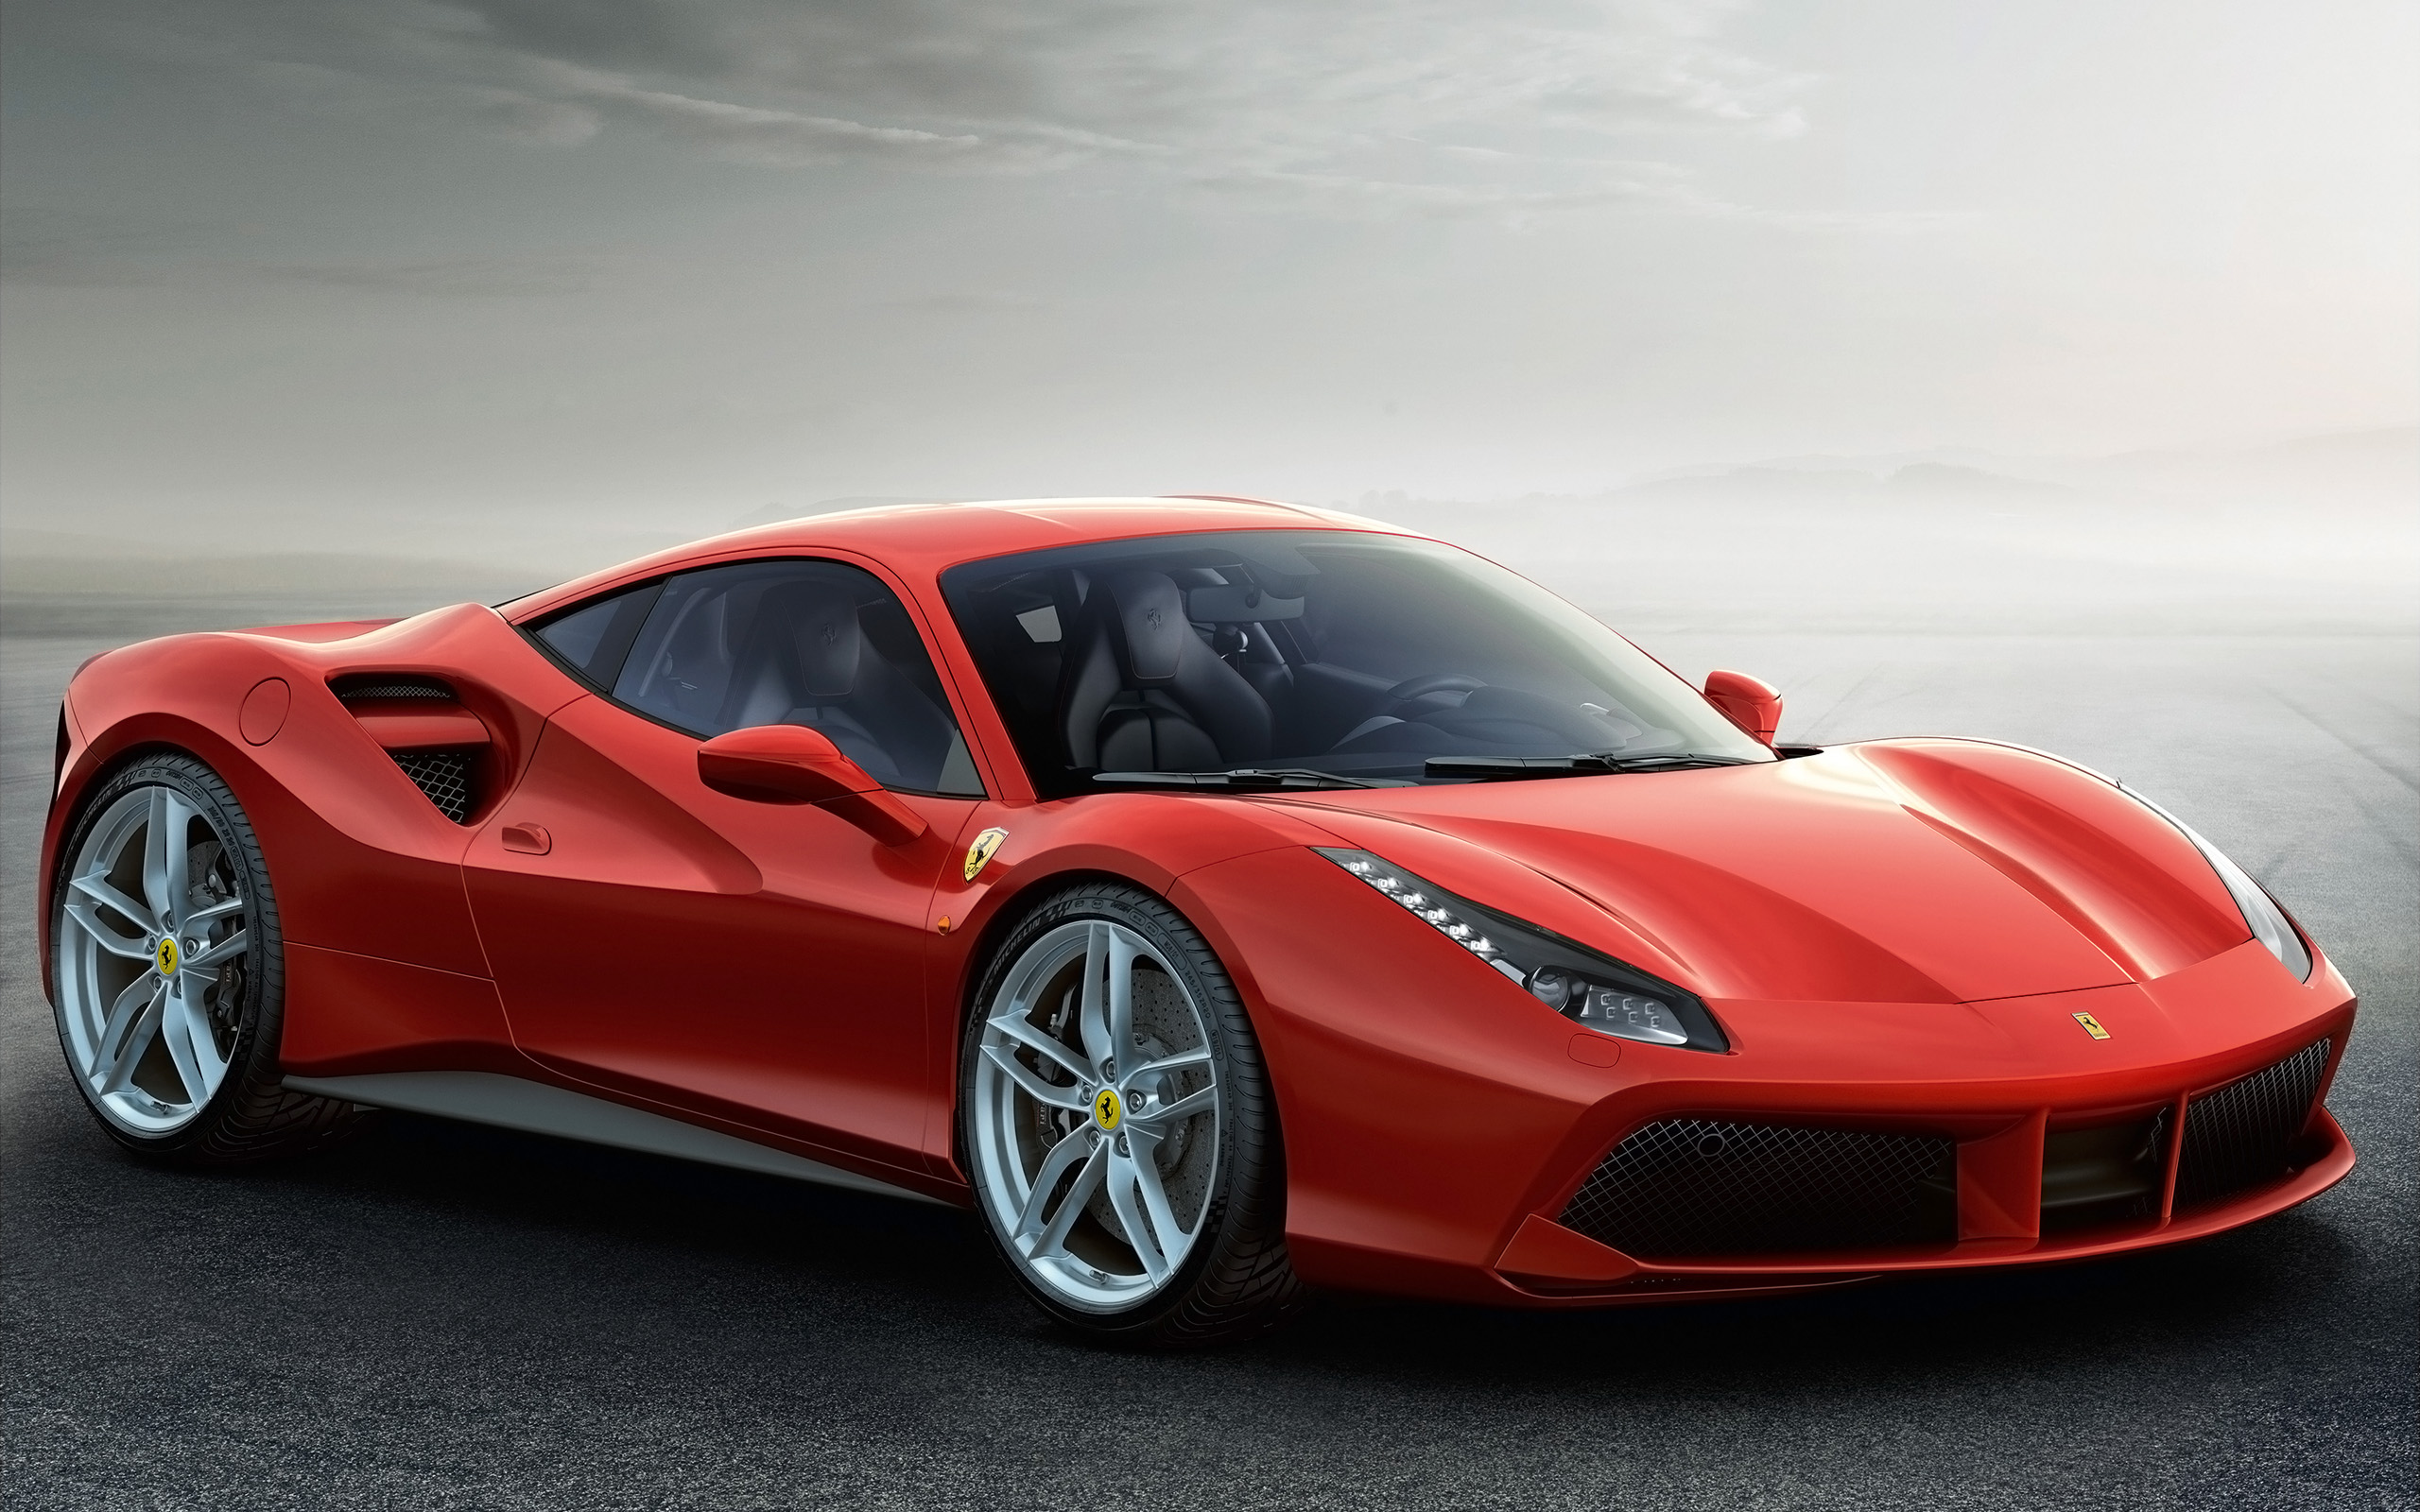 Title: Ferrari 488: A Marvel of Performance Engineering and Exhilaration